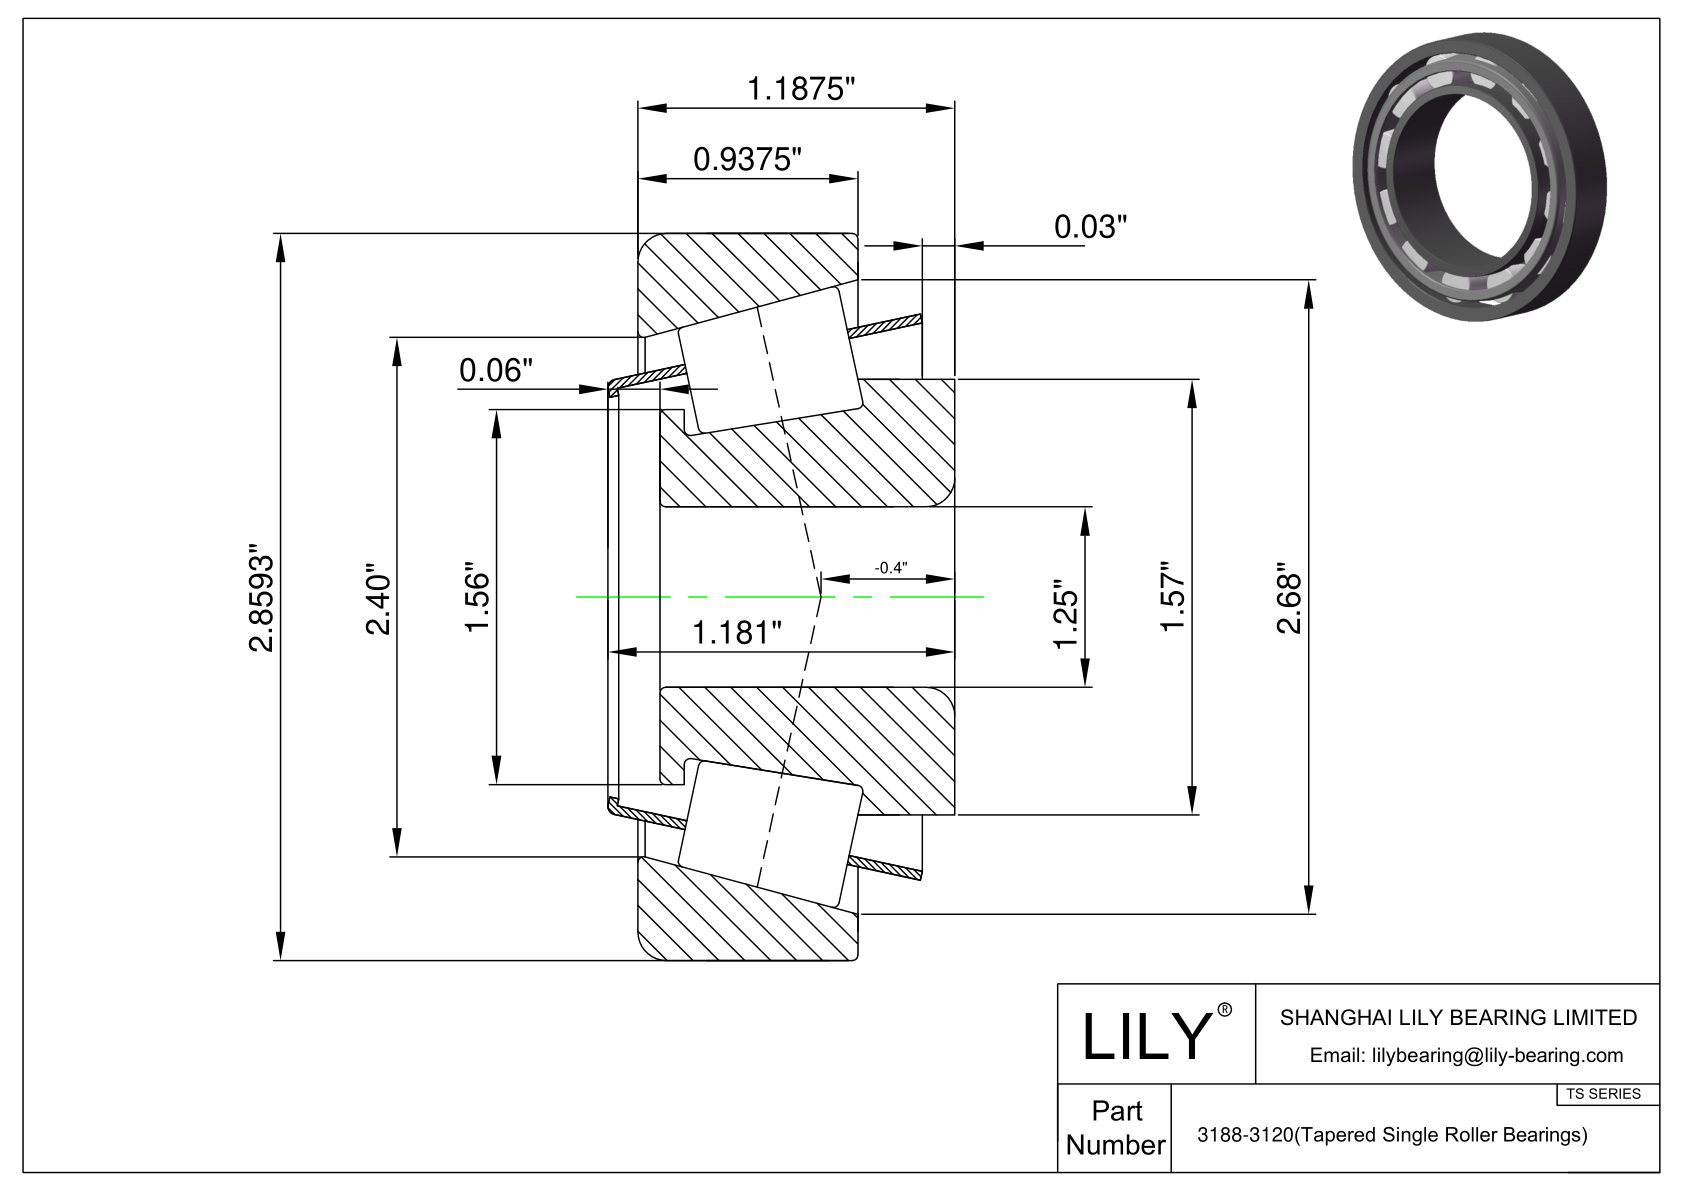 3188-3120 TS (Tapered Single Roller Bearings) (Imperial) cad drawing